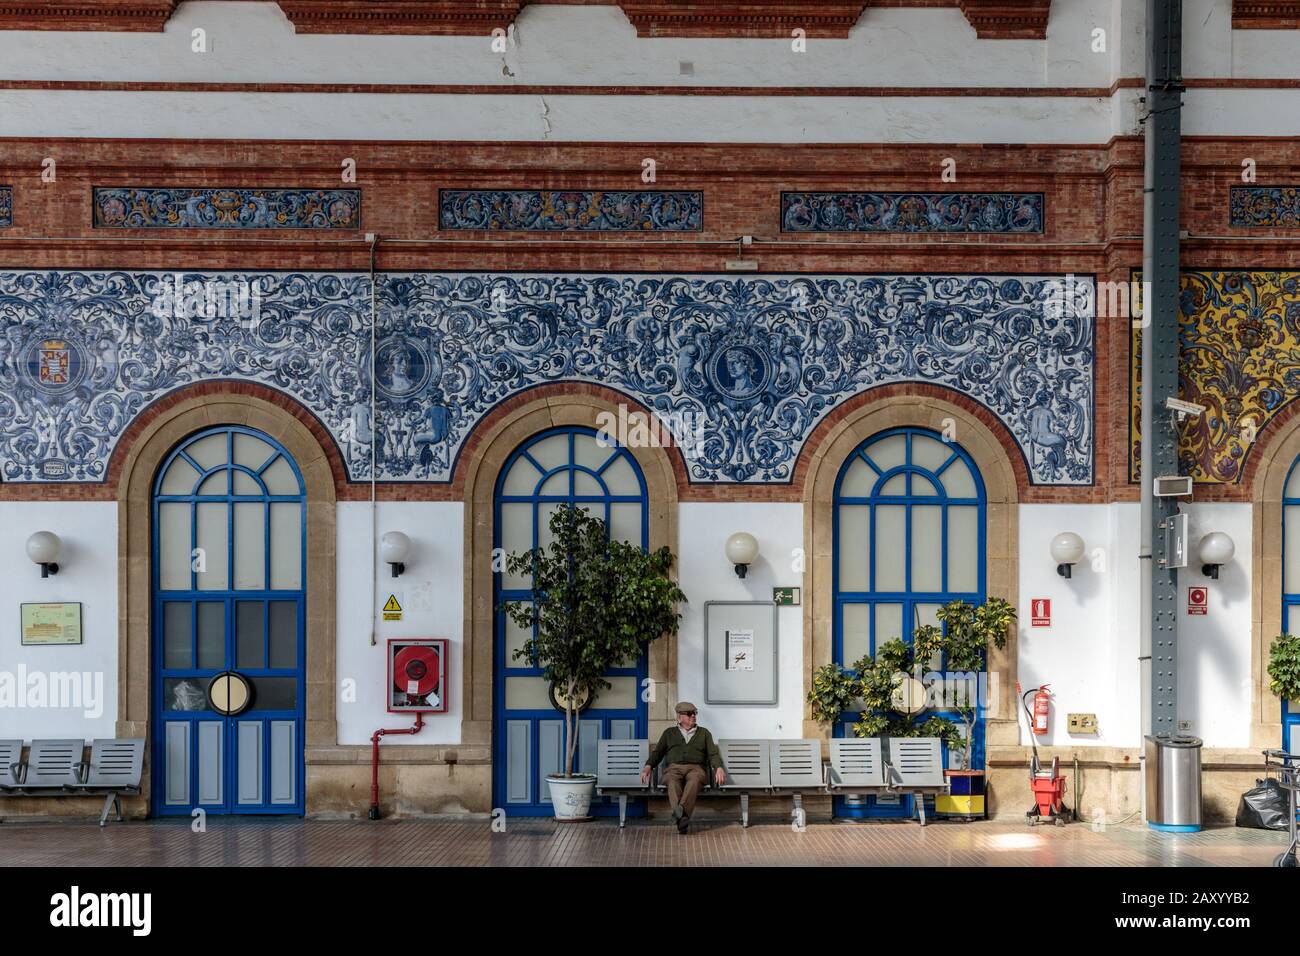 Historic Railway station in Jerez de la Frontera, designed by Anibal Gonzales and inaugurated in 1863, Spain Stock Photo